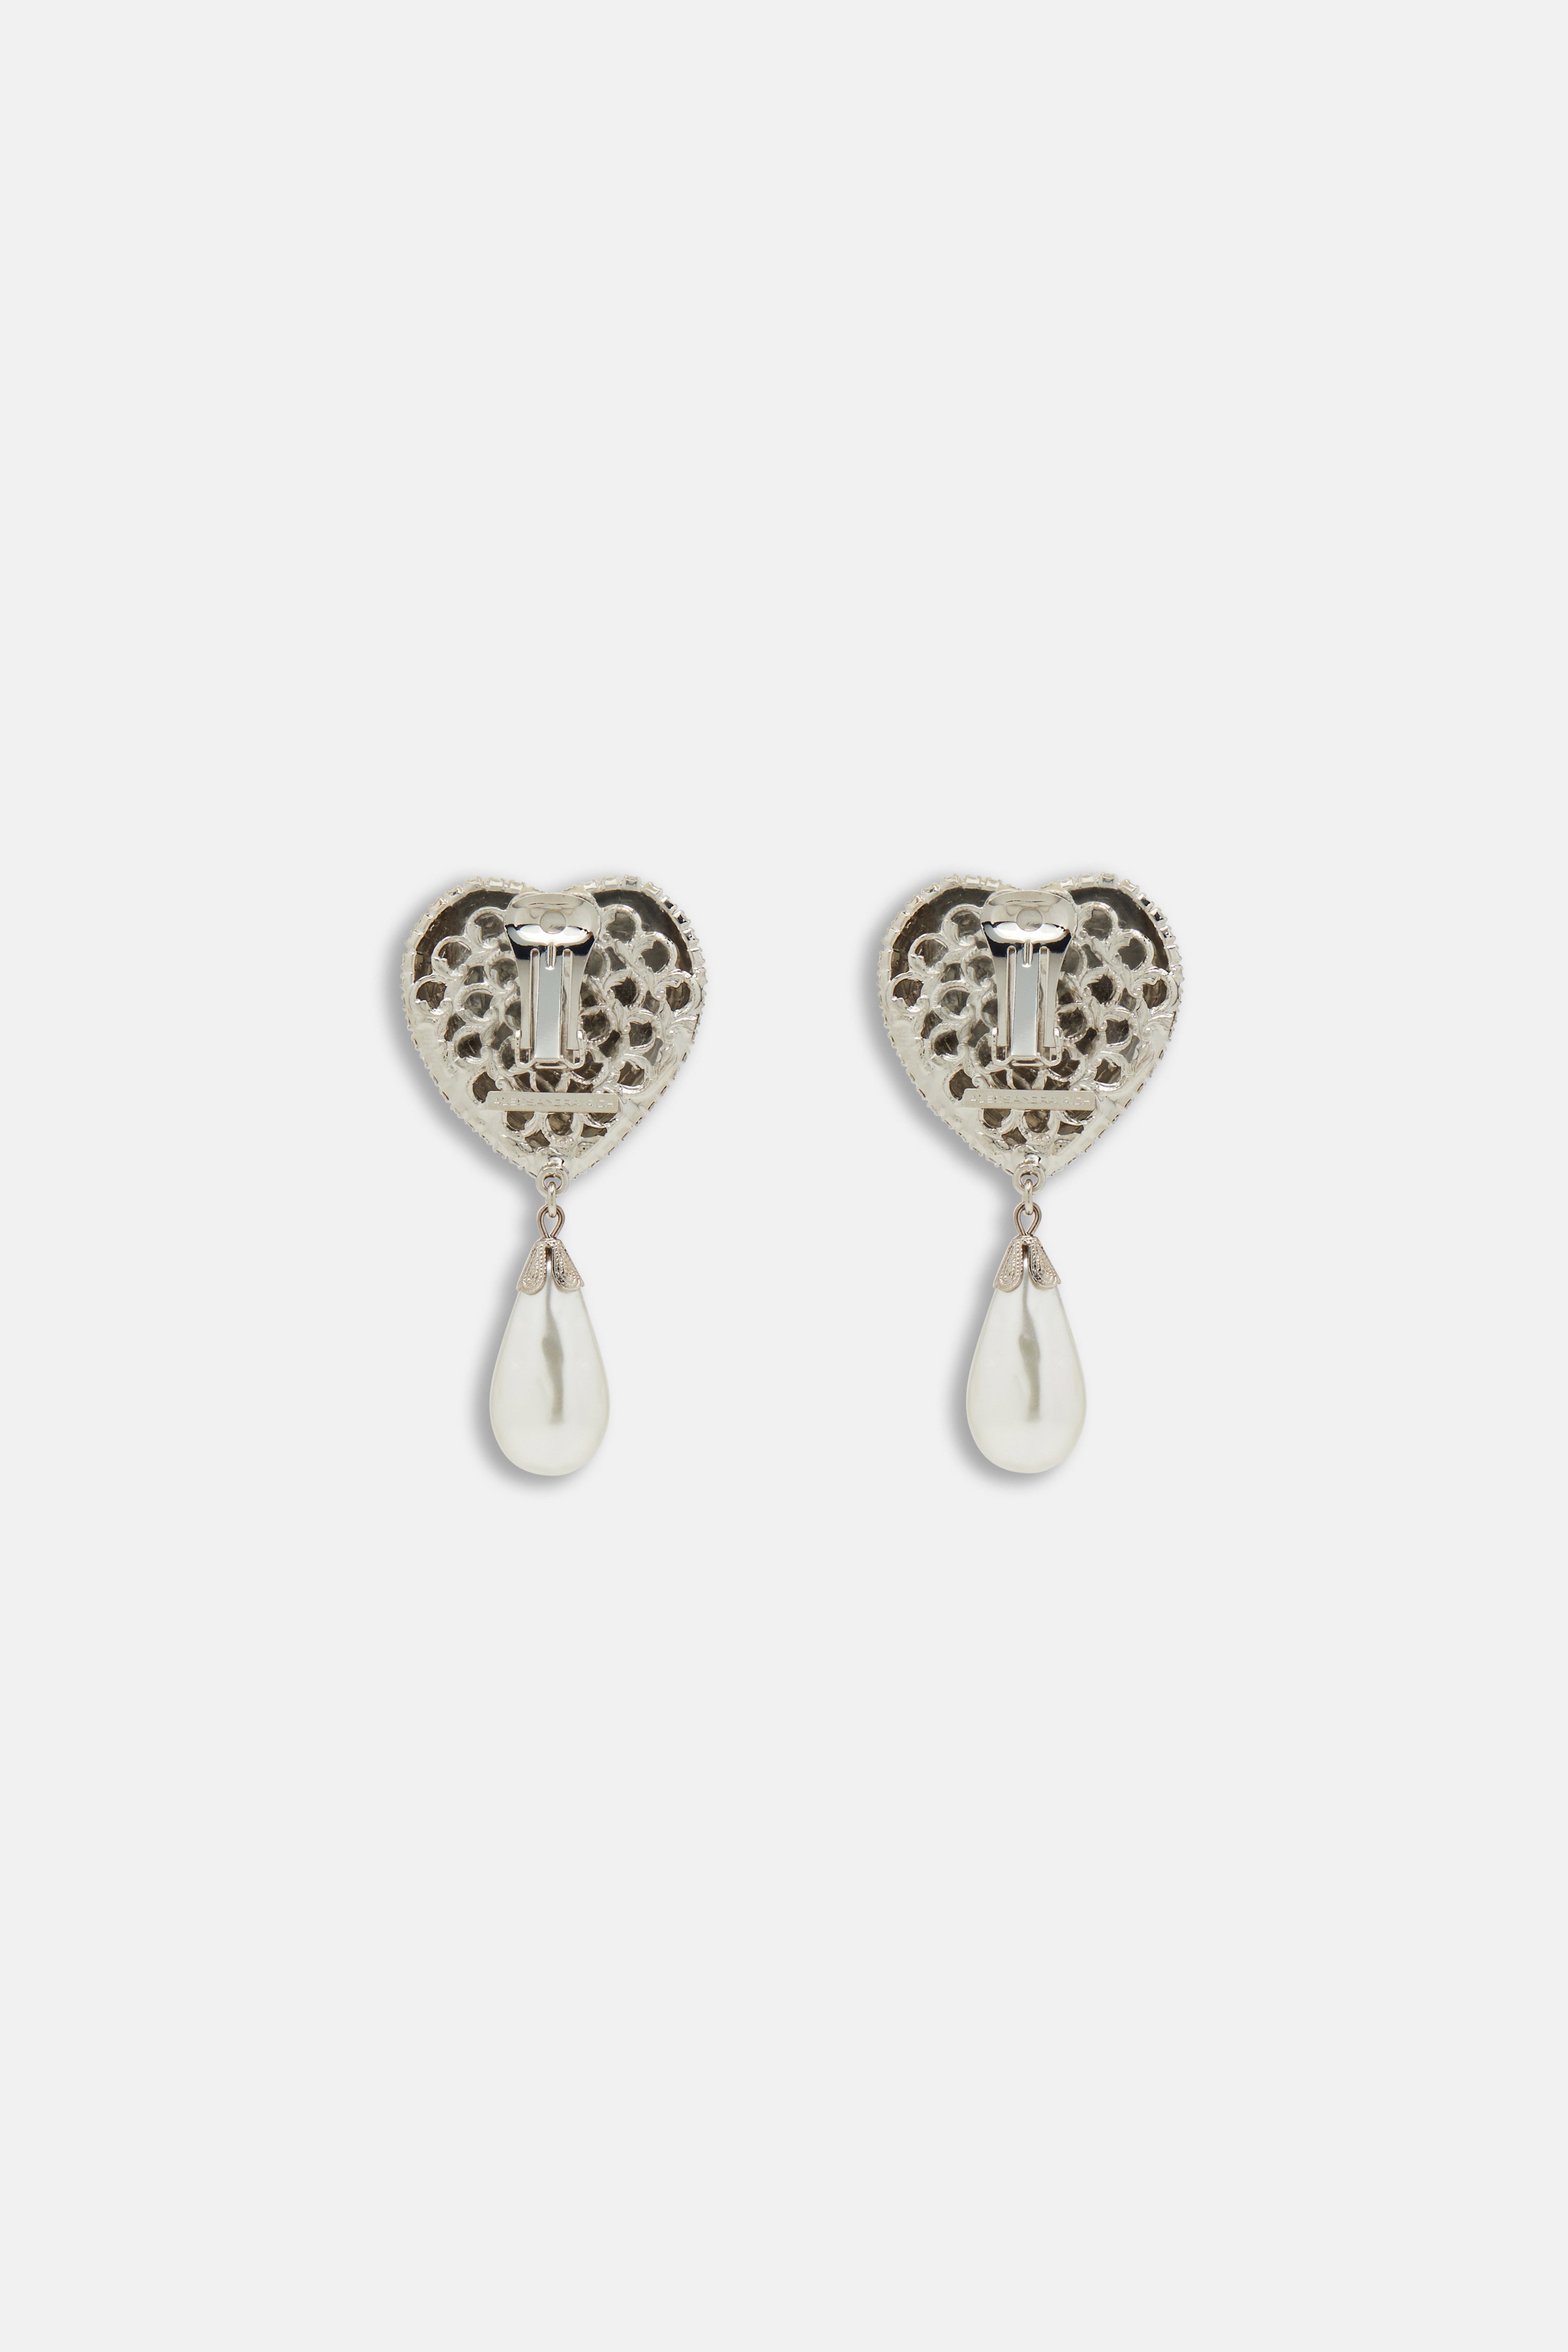 HEART CRYSTAL EARRINGS WITH PENDANT PEARL